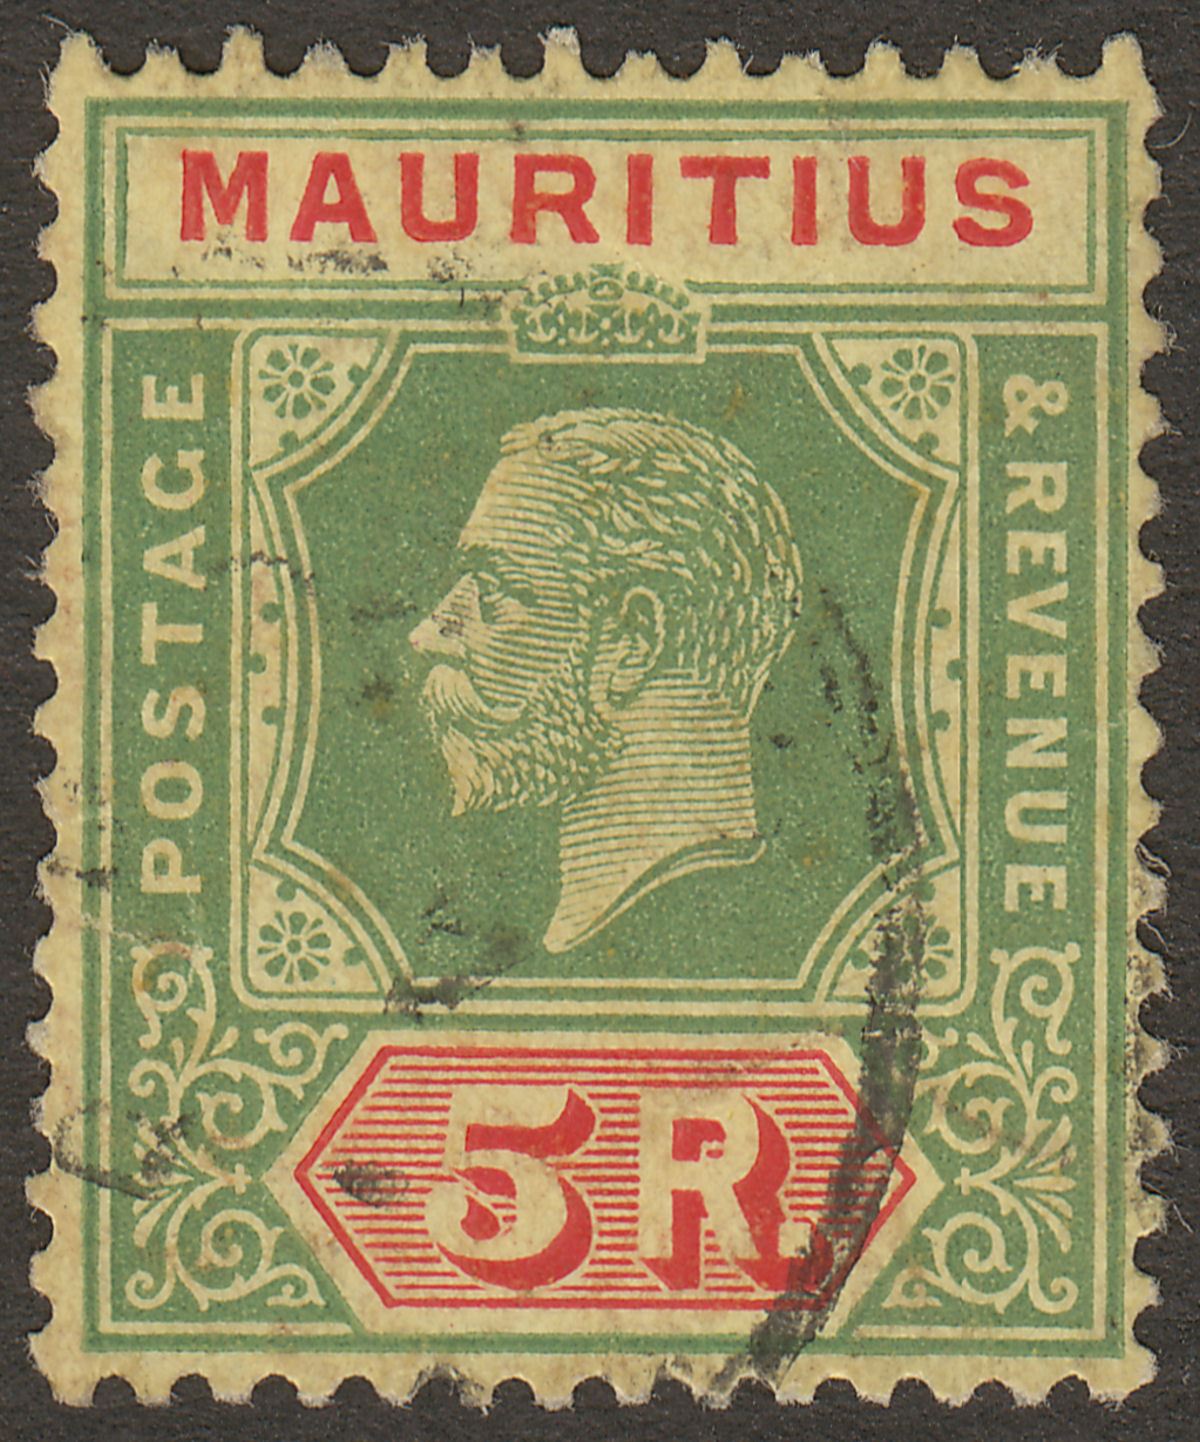 Mauritius 1924 KGV 5r Green and Red on Yellow Used SG240 cat £110